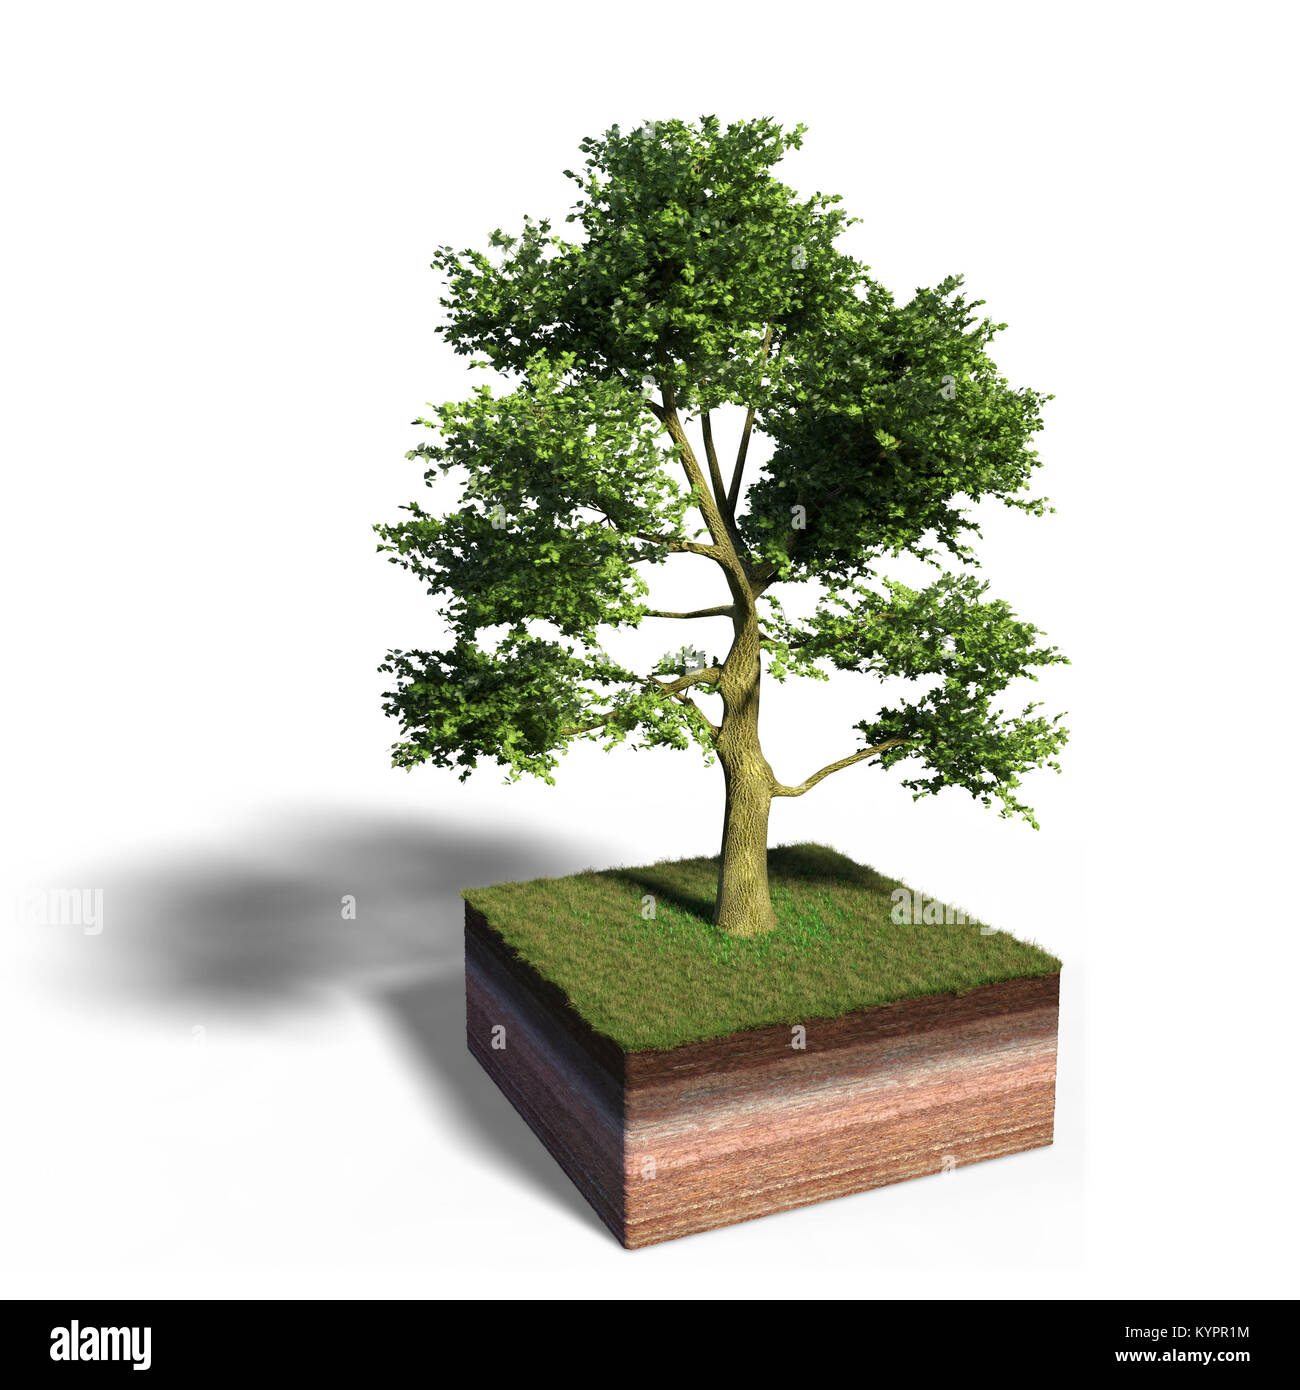 model of a cross section of ground with white ash tree tree and grass on the surface (3d illustration, isolated with shadow on white background) Stock Photo